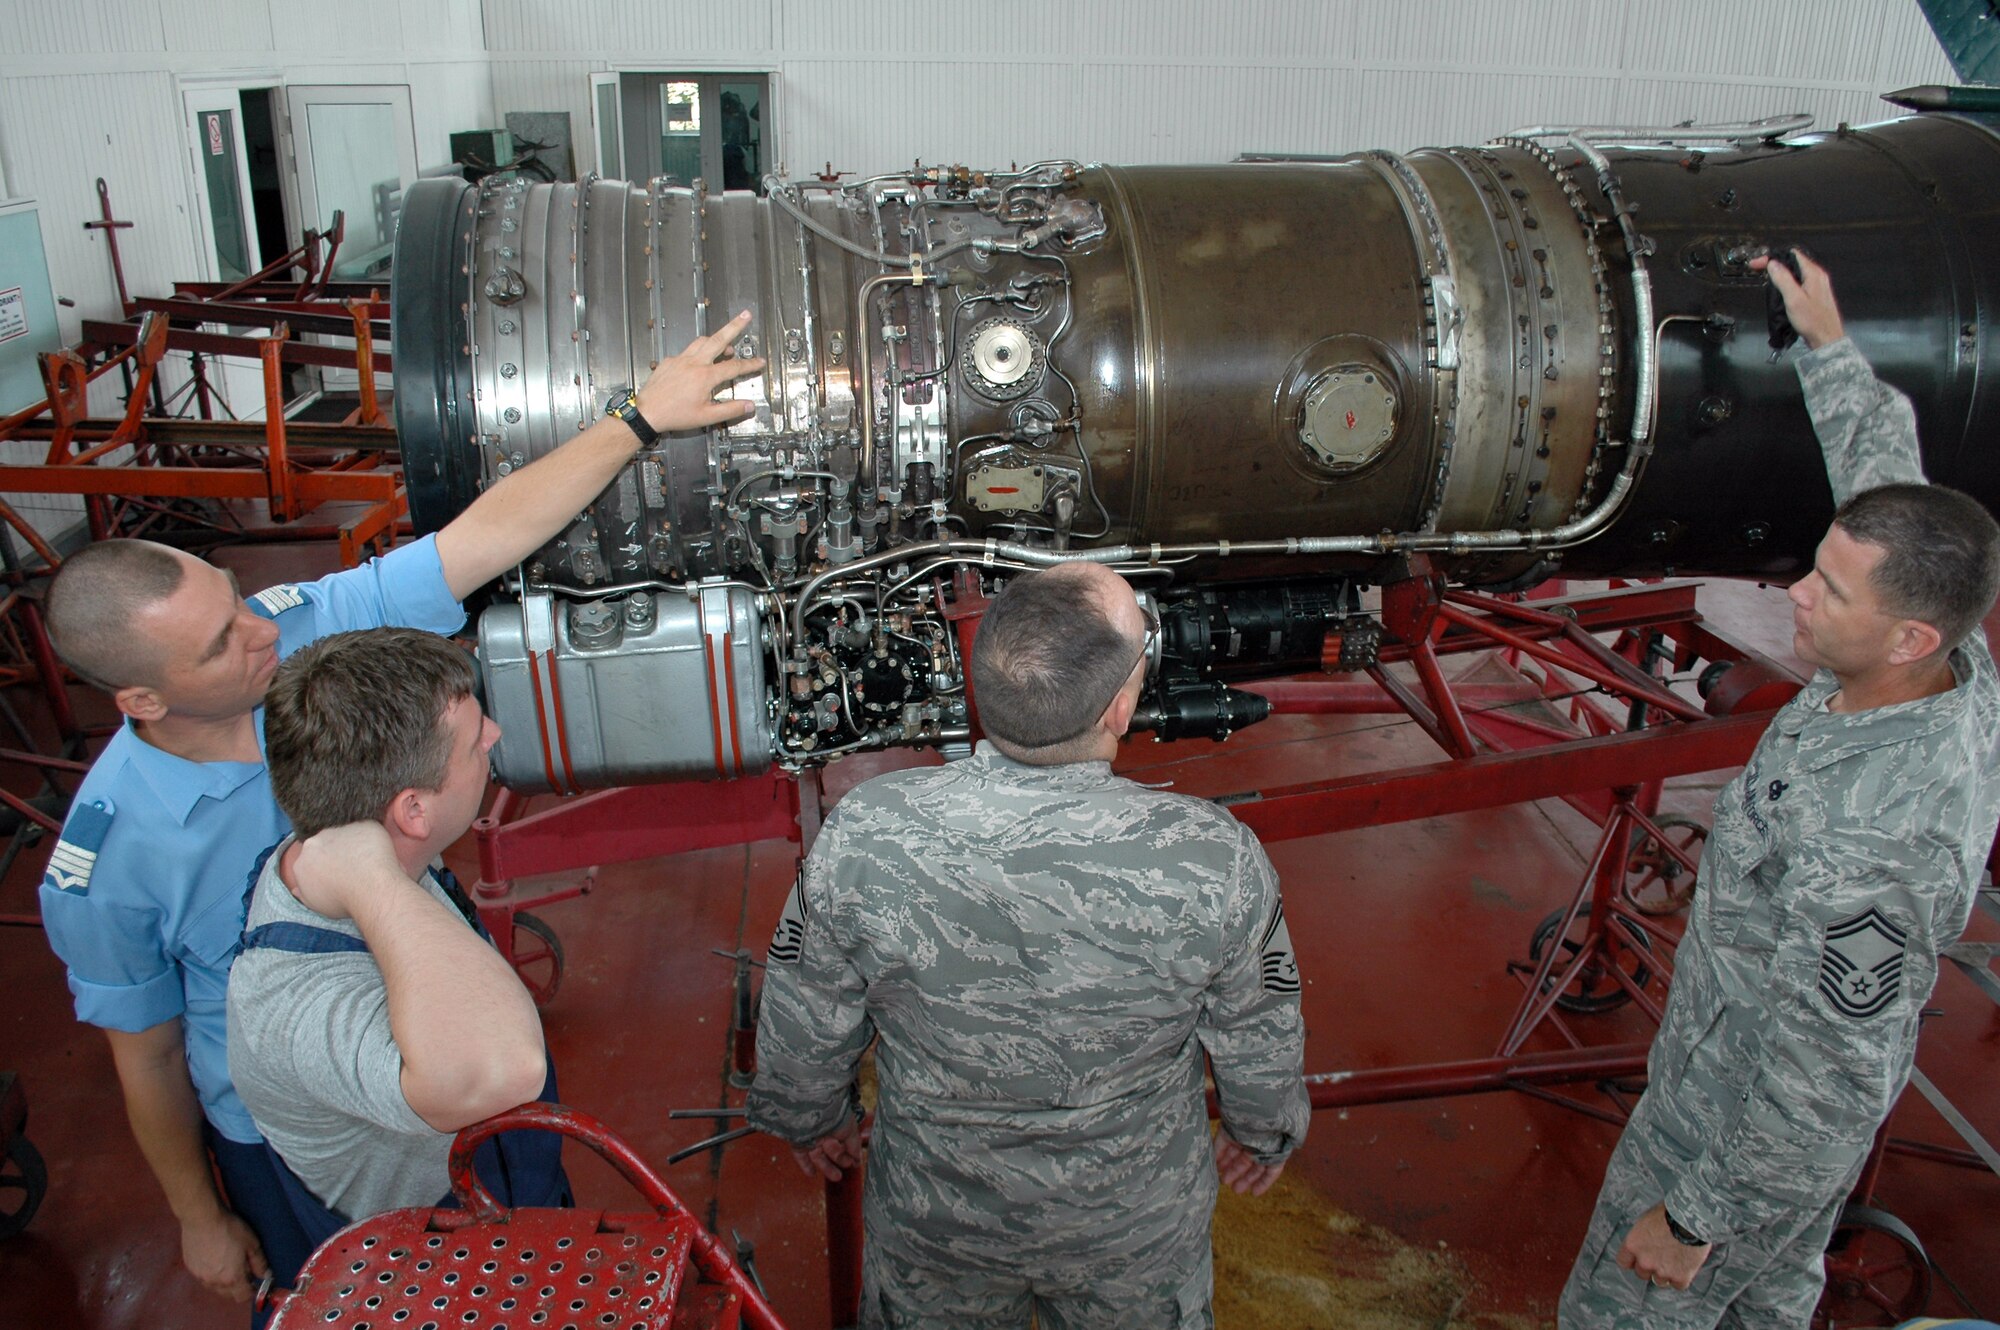 Romanian Air Force Warrant Officer Second Class Dima Valentin, (far left), from the 86th Air Base in Fetesti, Romania discuss the inner workings of the MiG-21 Lancer fighter engine Aug. 26, 2009, with two senior NCOs from the 31st Maintenance Group.  The two NCOs were part of a three-person U.S. Air Forces in Europe Maintenance NCO Training Program Traveling Contact Team who met with RoAF aircraft maintainers and WO and NCO school instructors Aug. 25-28.  (U.S. Air Force photo/Tech. Sgt. Michael O’Connor)